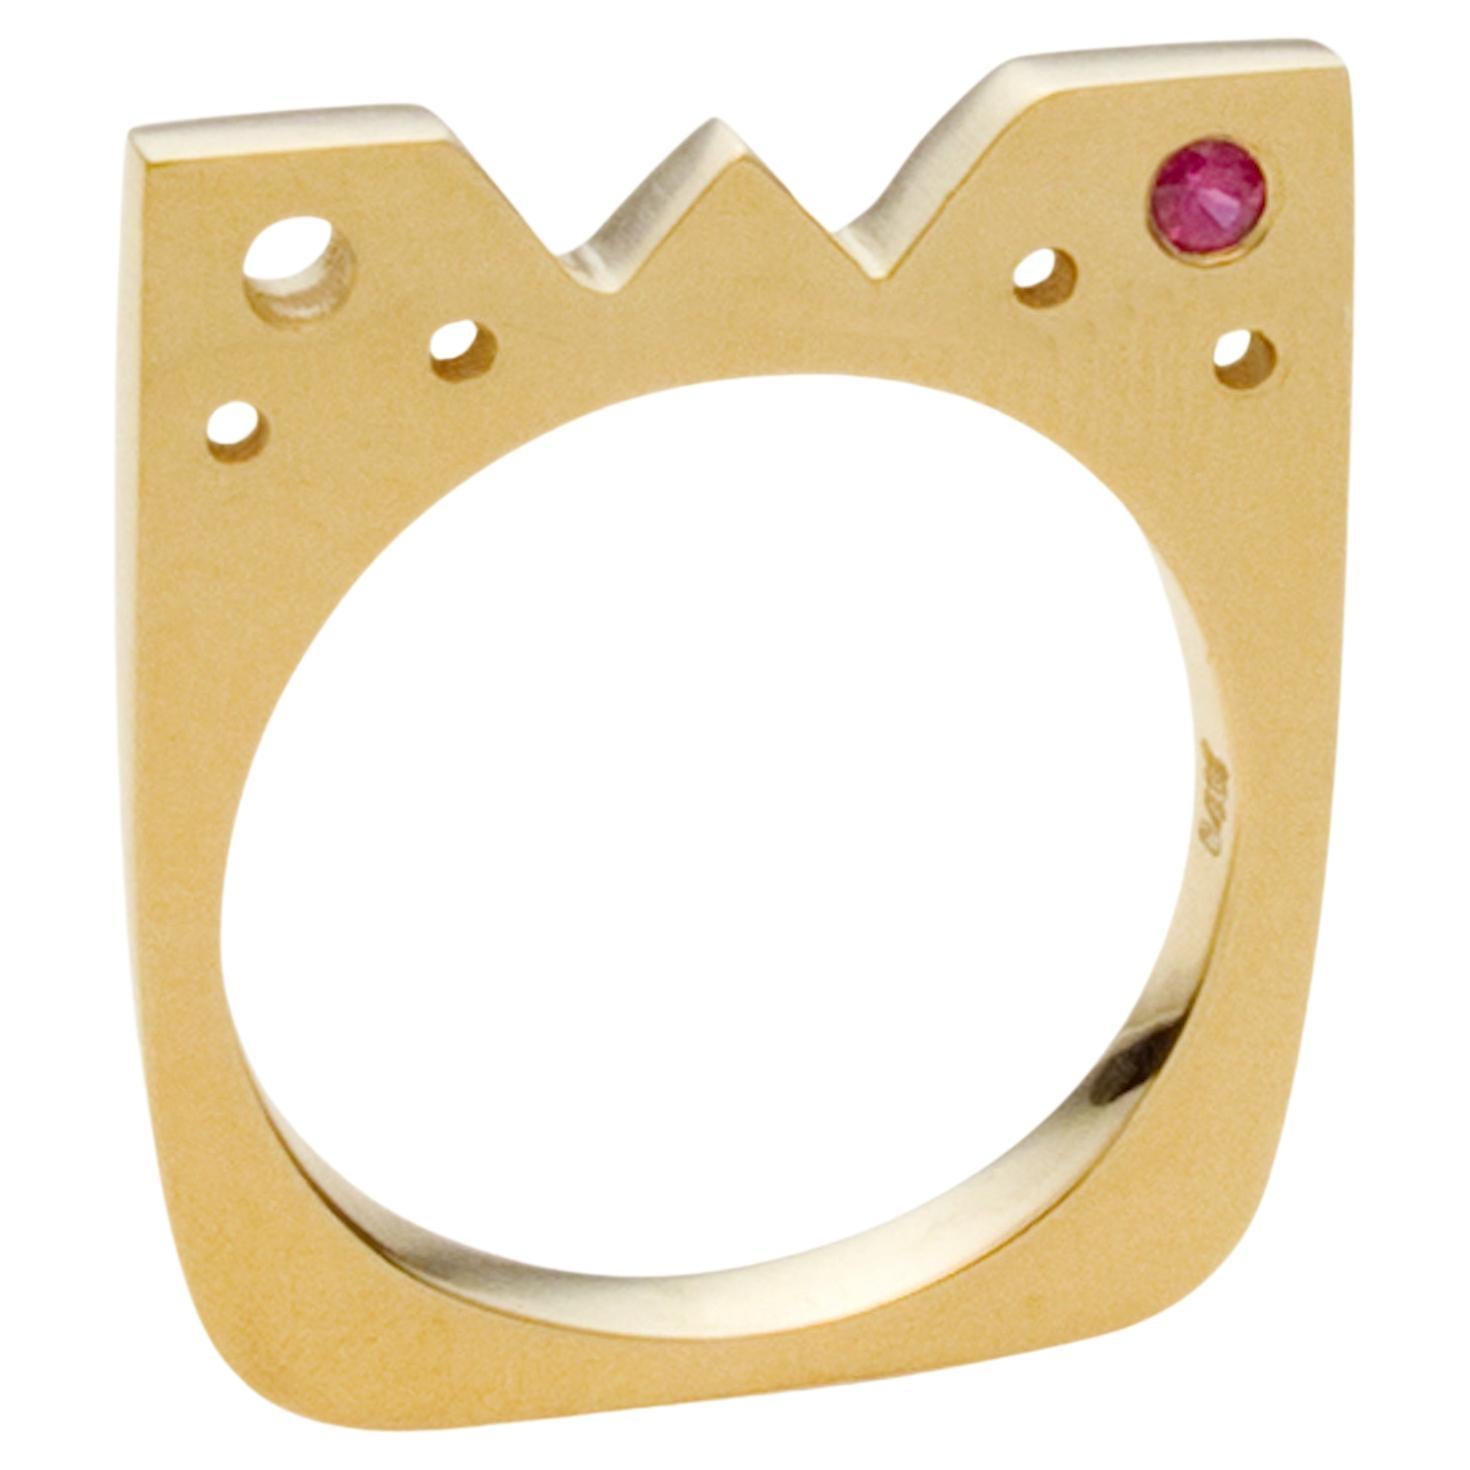 Susan Crow Studio Square Flat Ring in Yellow Gold with Dark Pink Sapphire